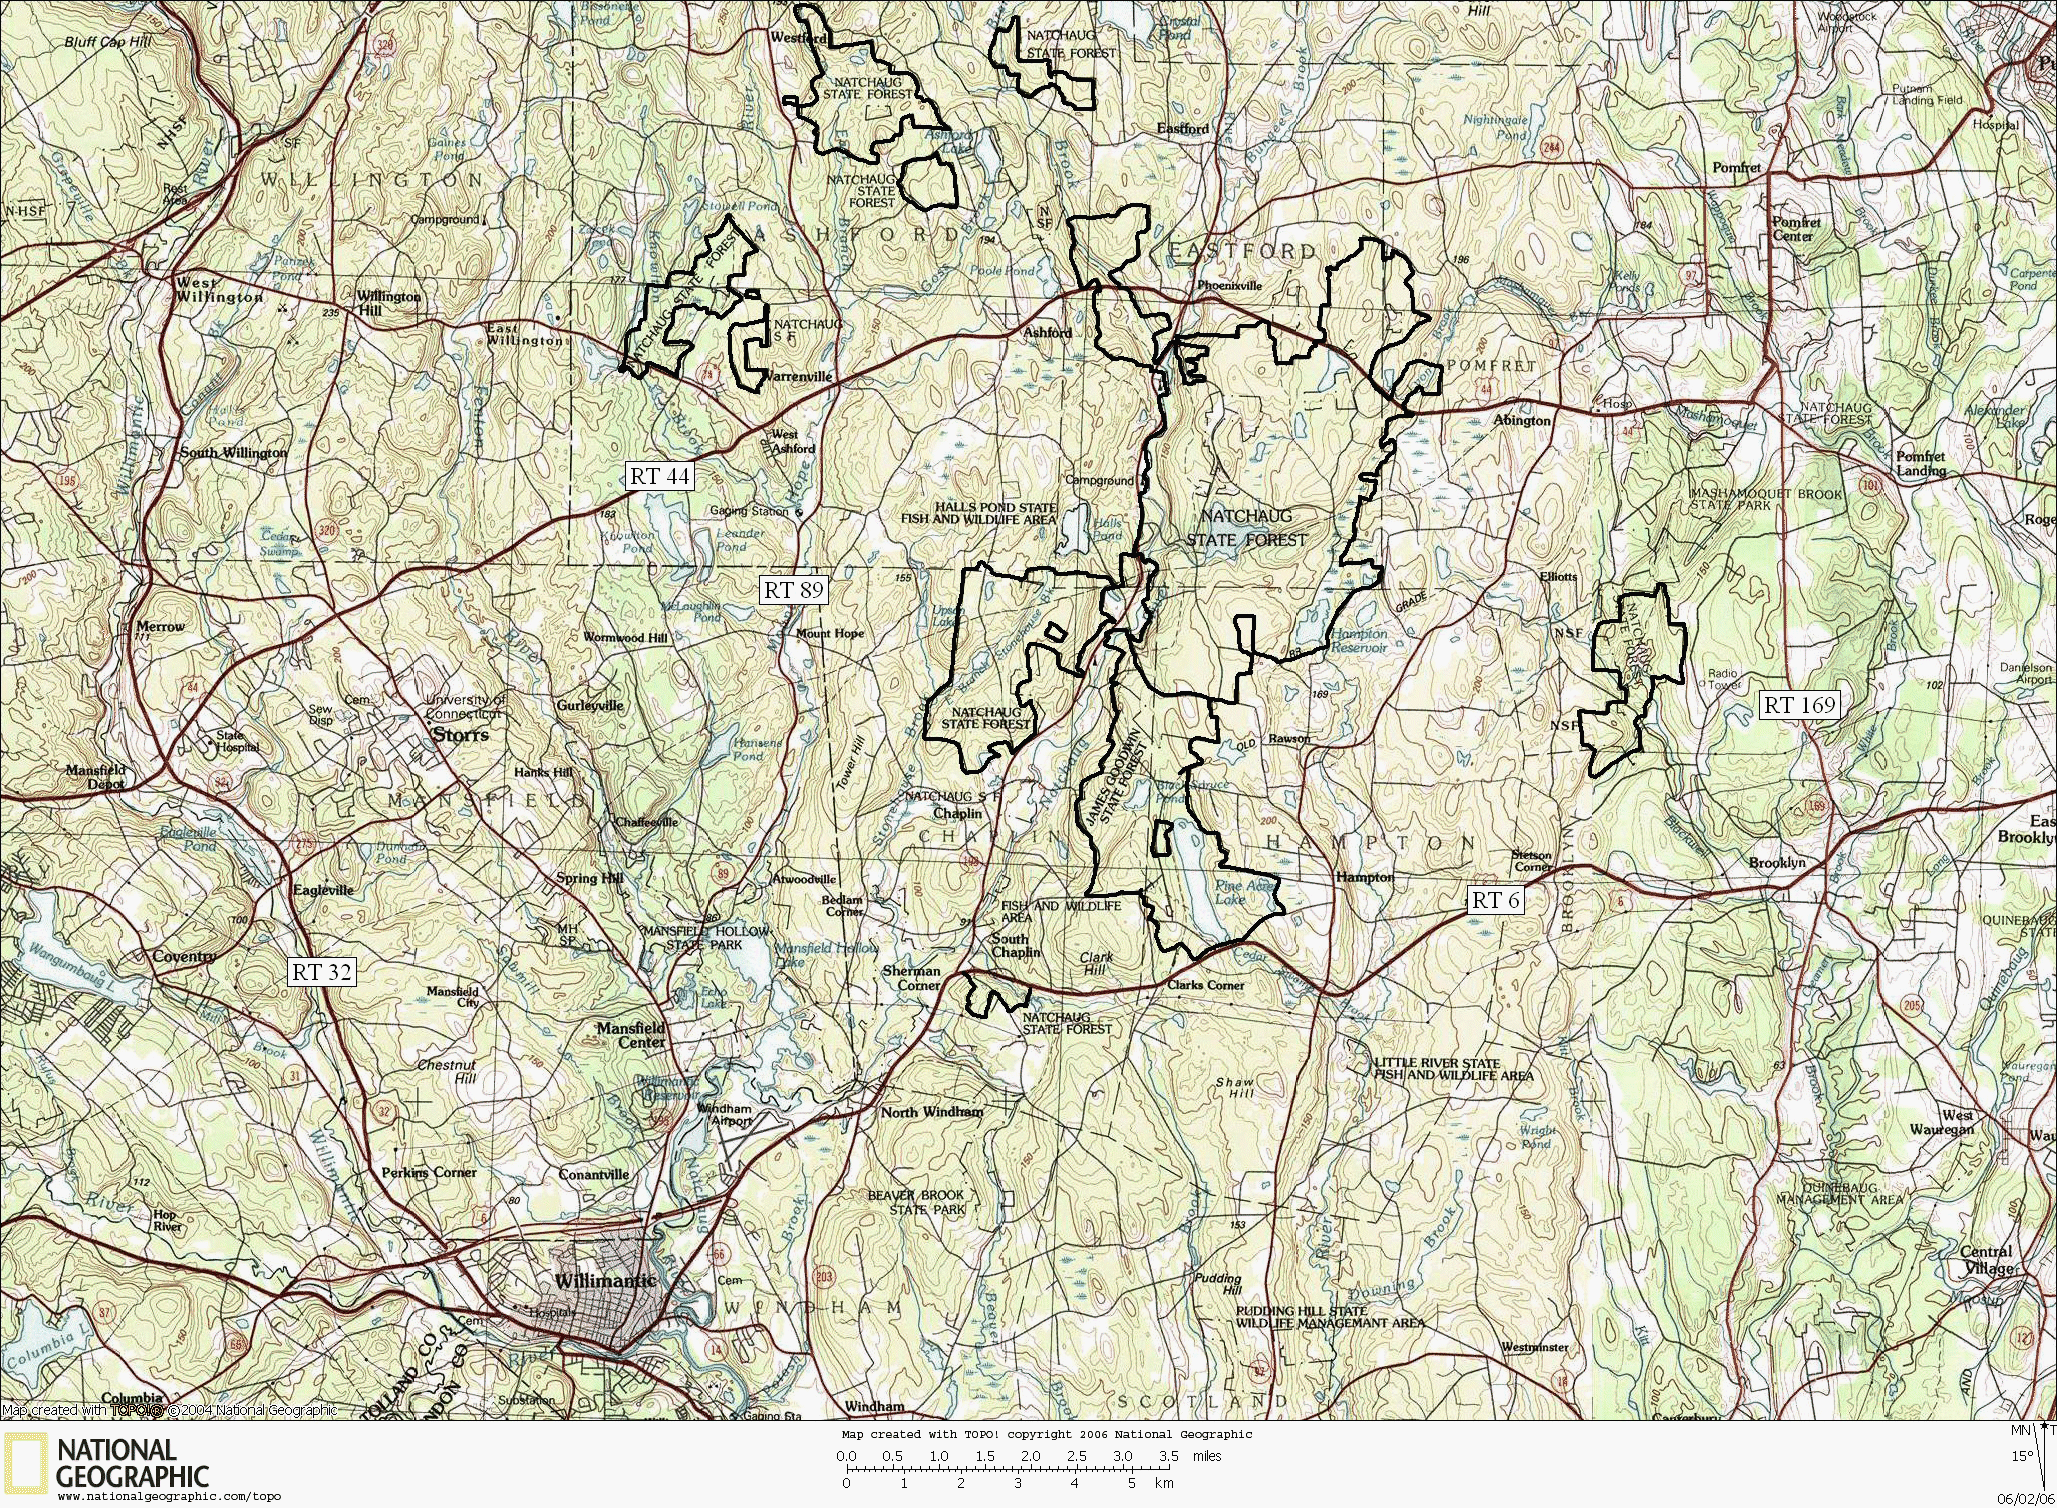 Natchaug, State Forest, Connecticut, Hiking, Trail, Map